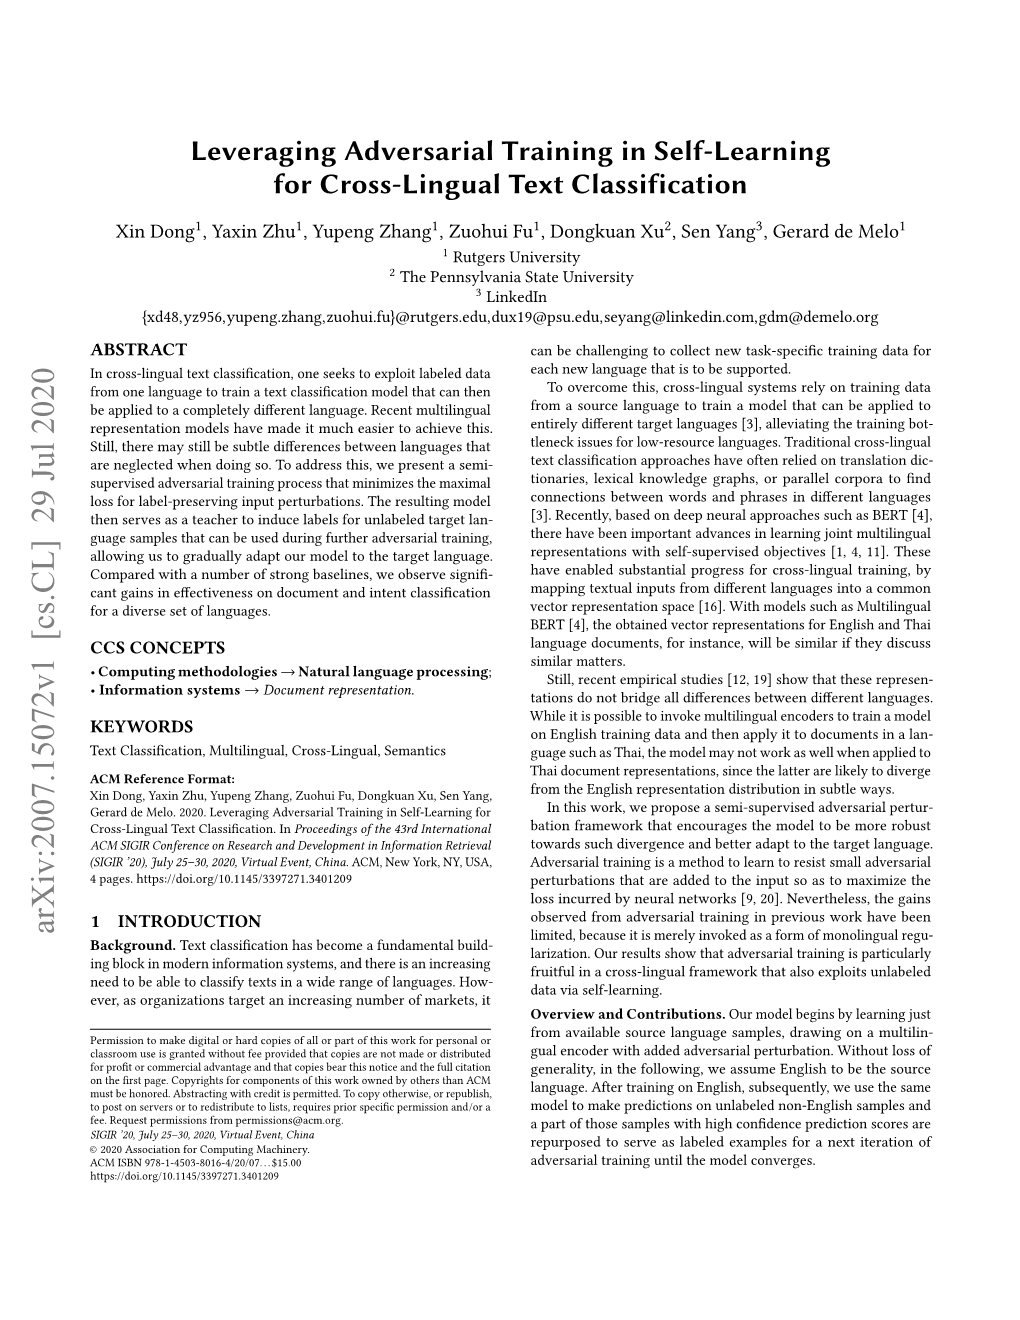 Leveraging Adversarial Training in Self-Learningfor Cross-Lingual Text Classification